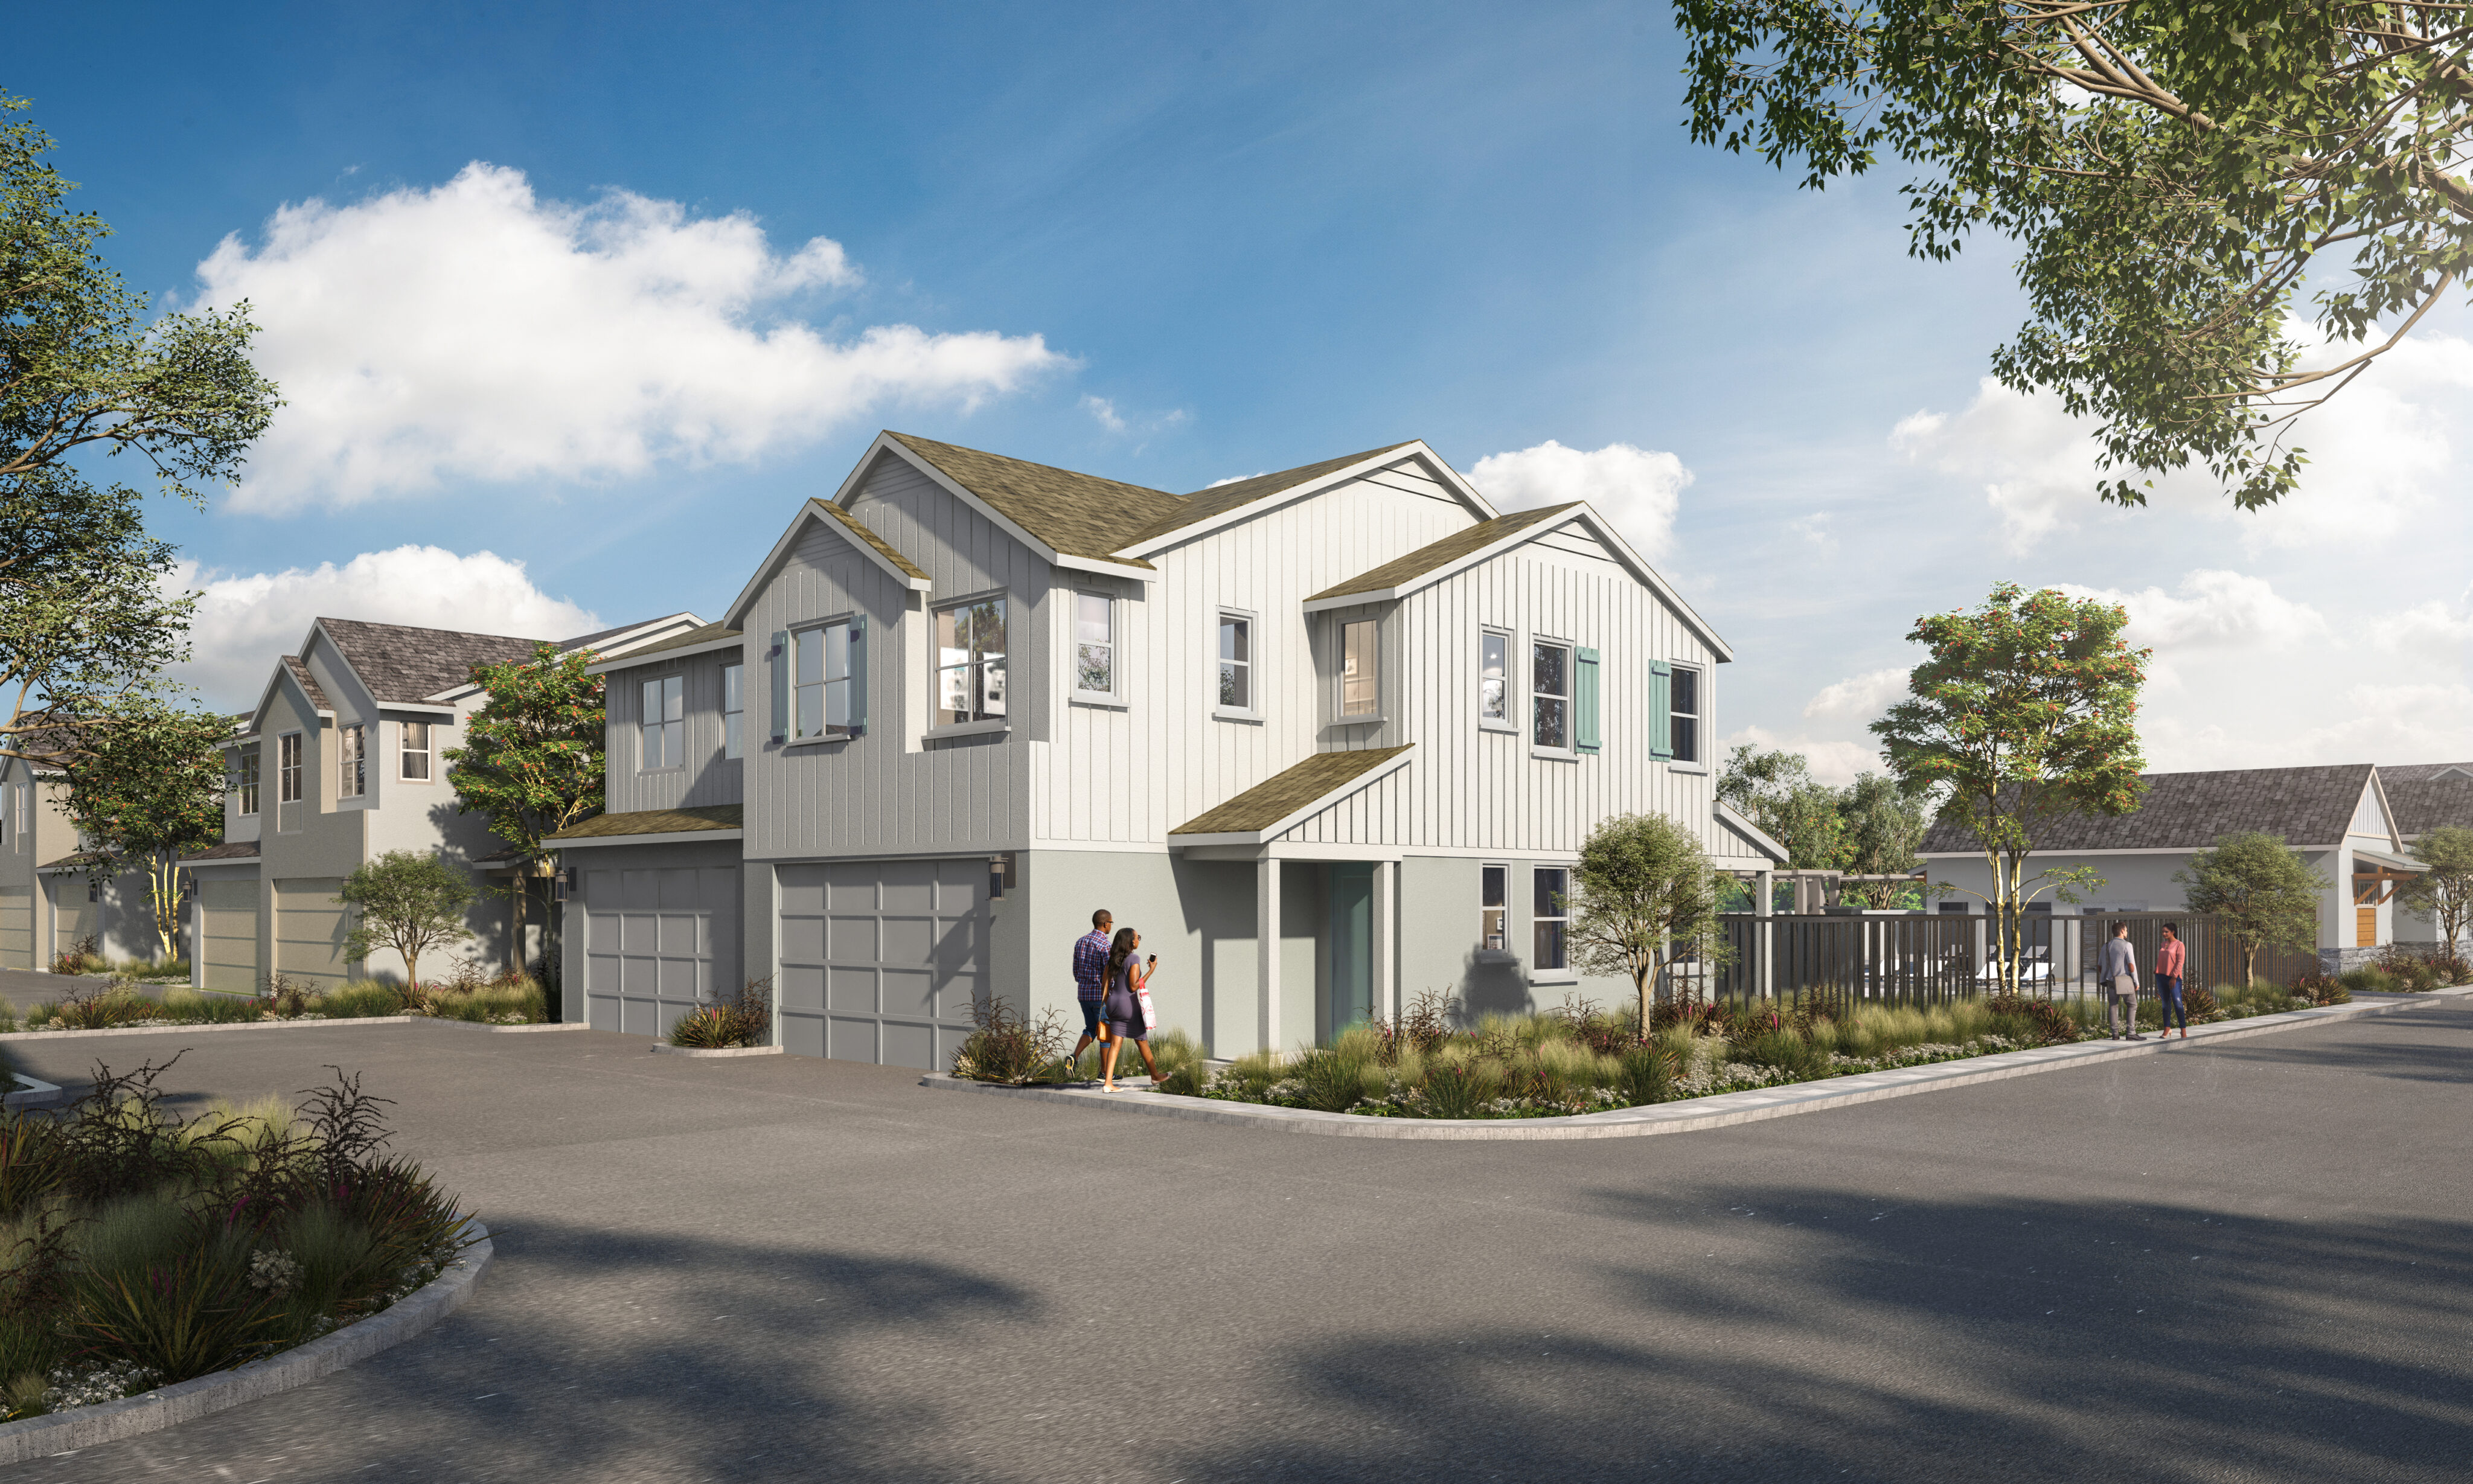 Rendering of white, two story single family home on a corner lot.